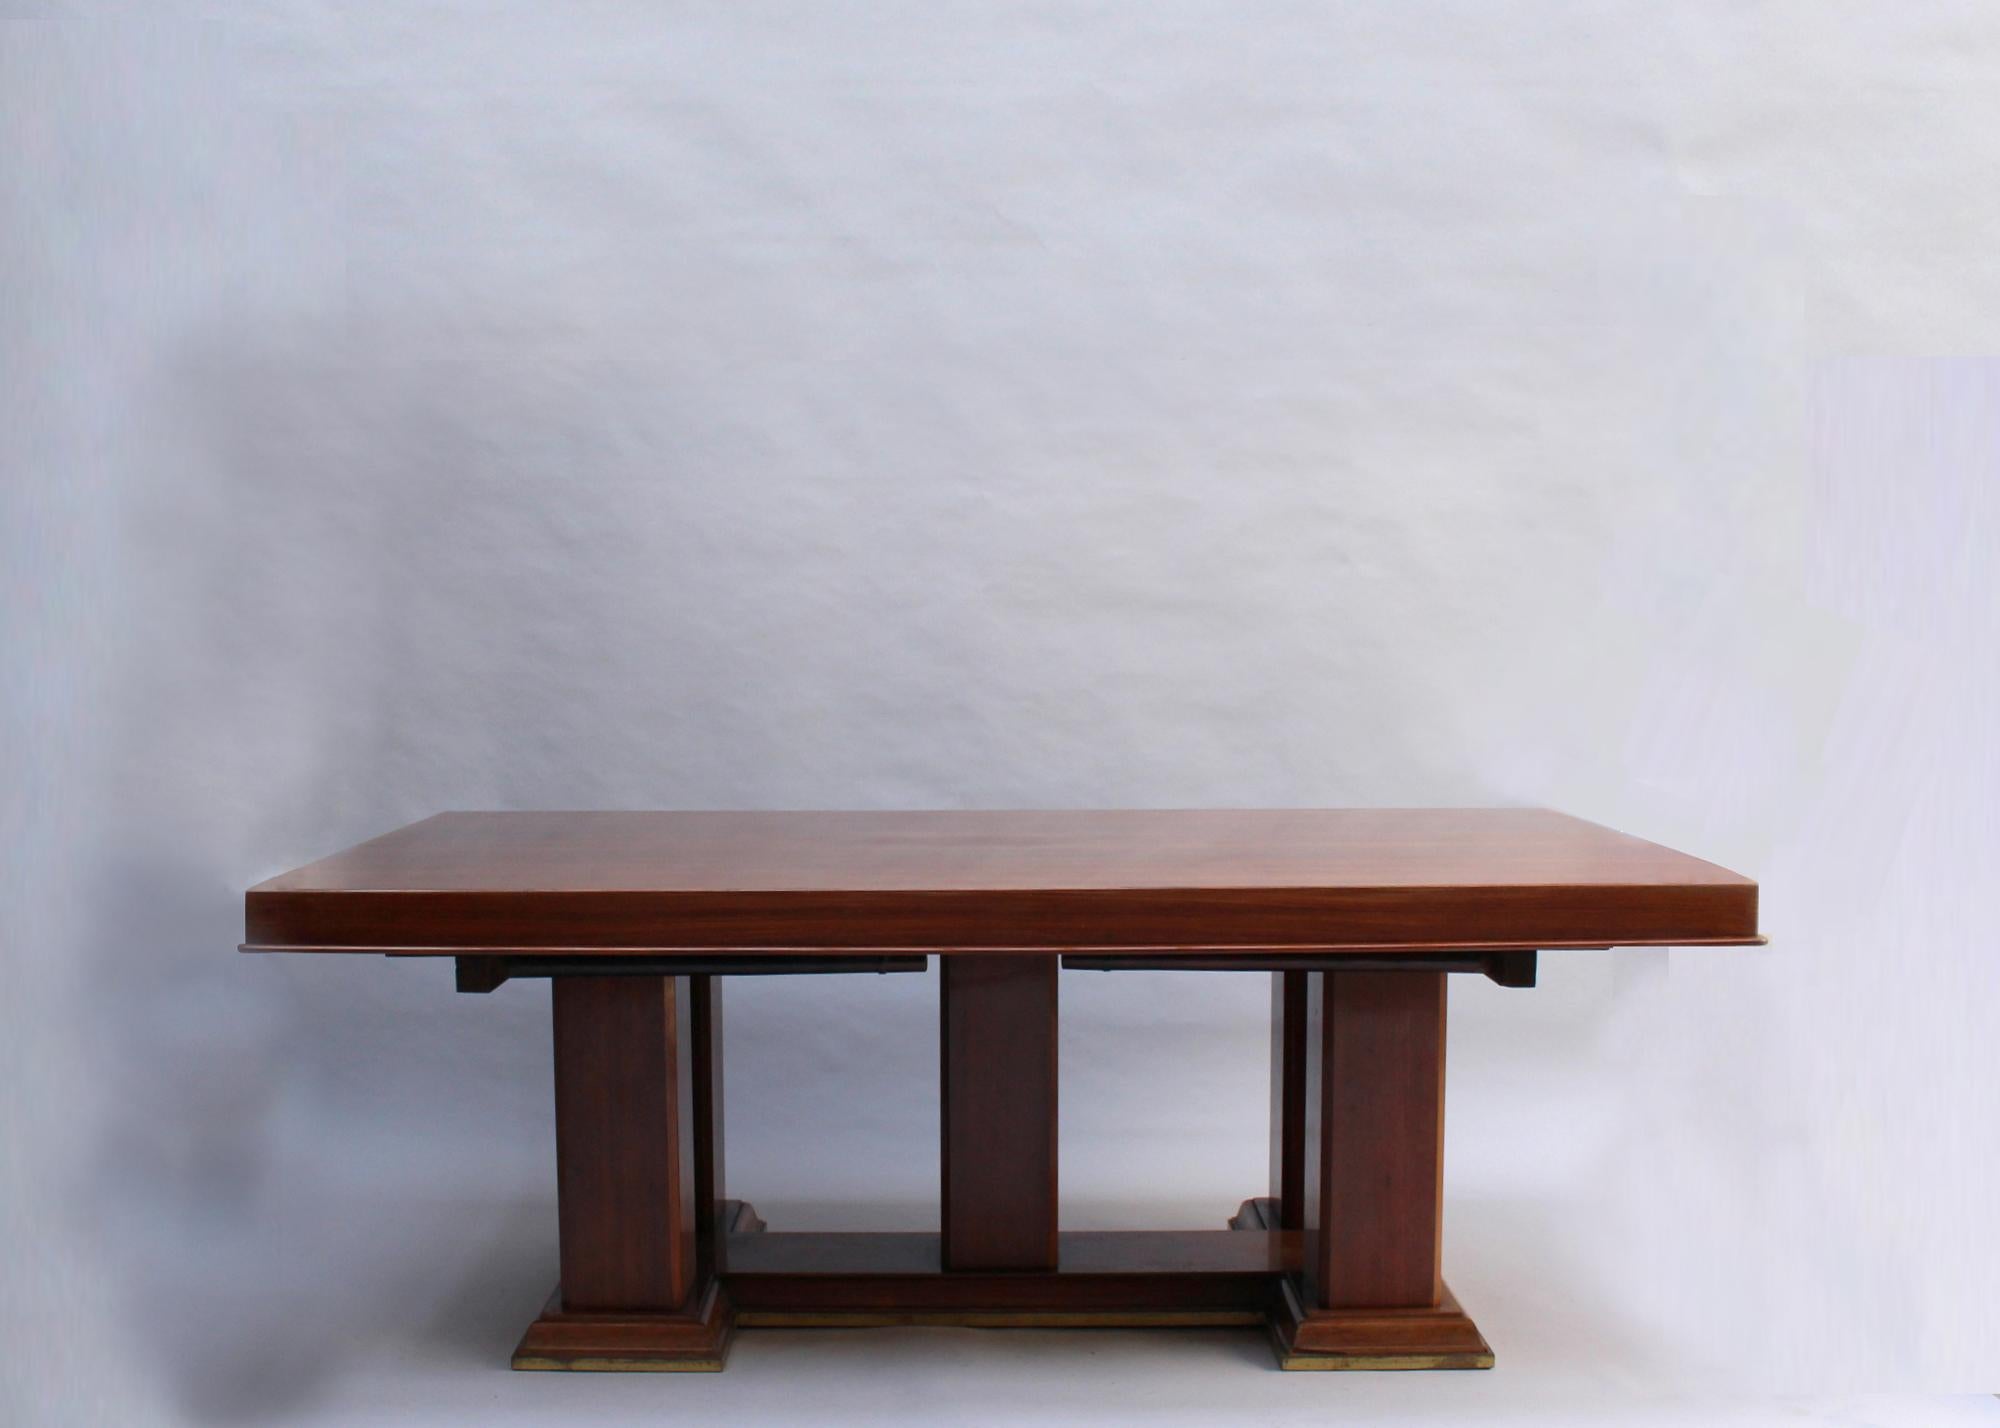 Mounted on a five-pedestal mahogany base with bronze details, the table can receive four end leaves for a total length of 13'2